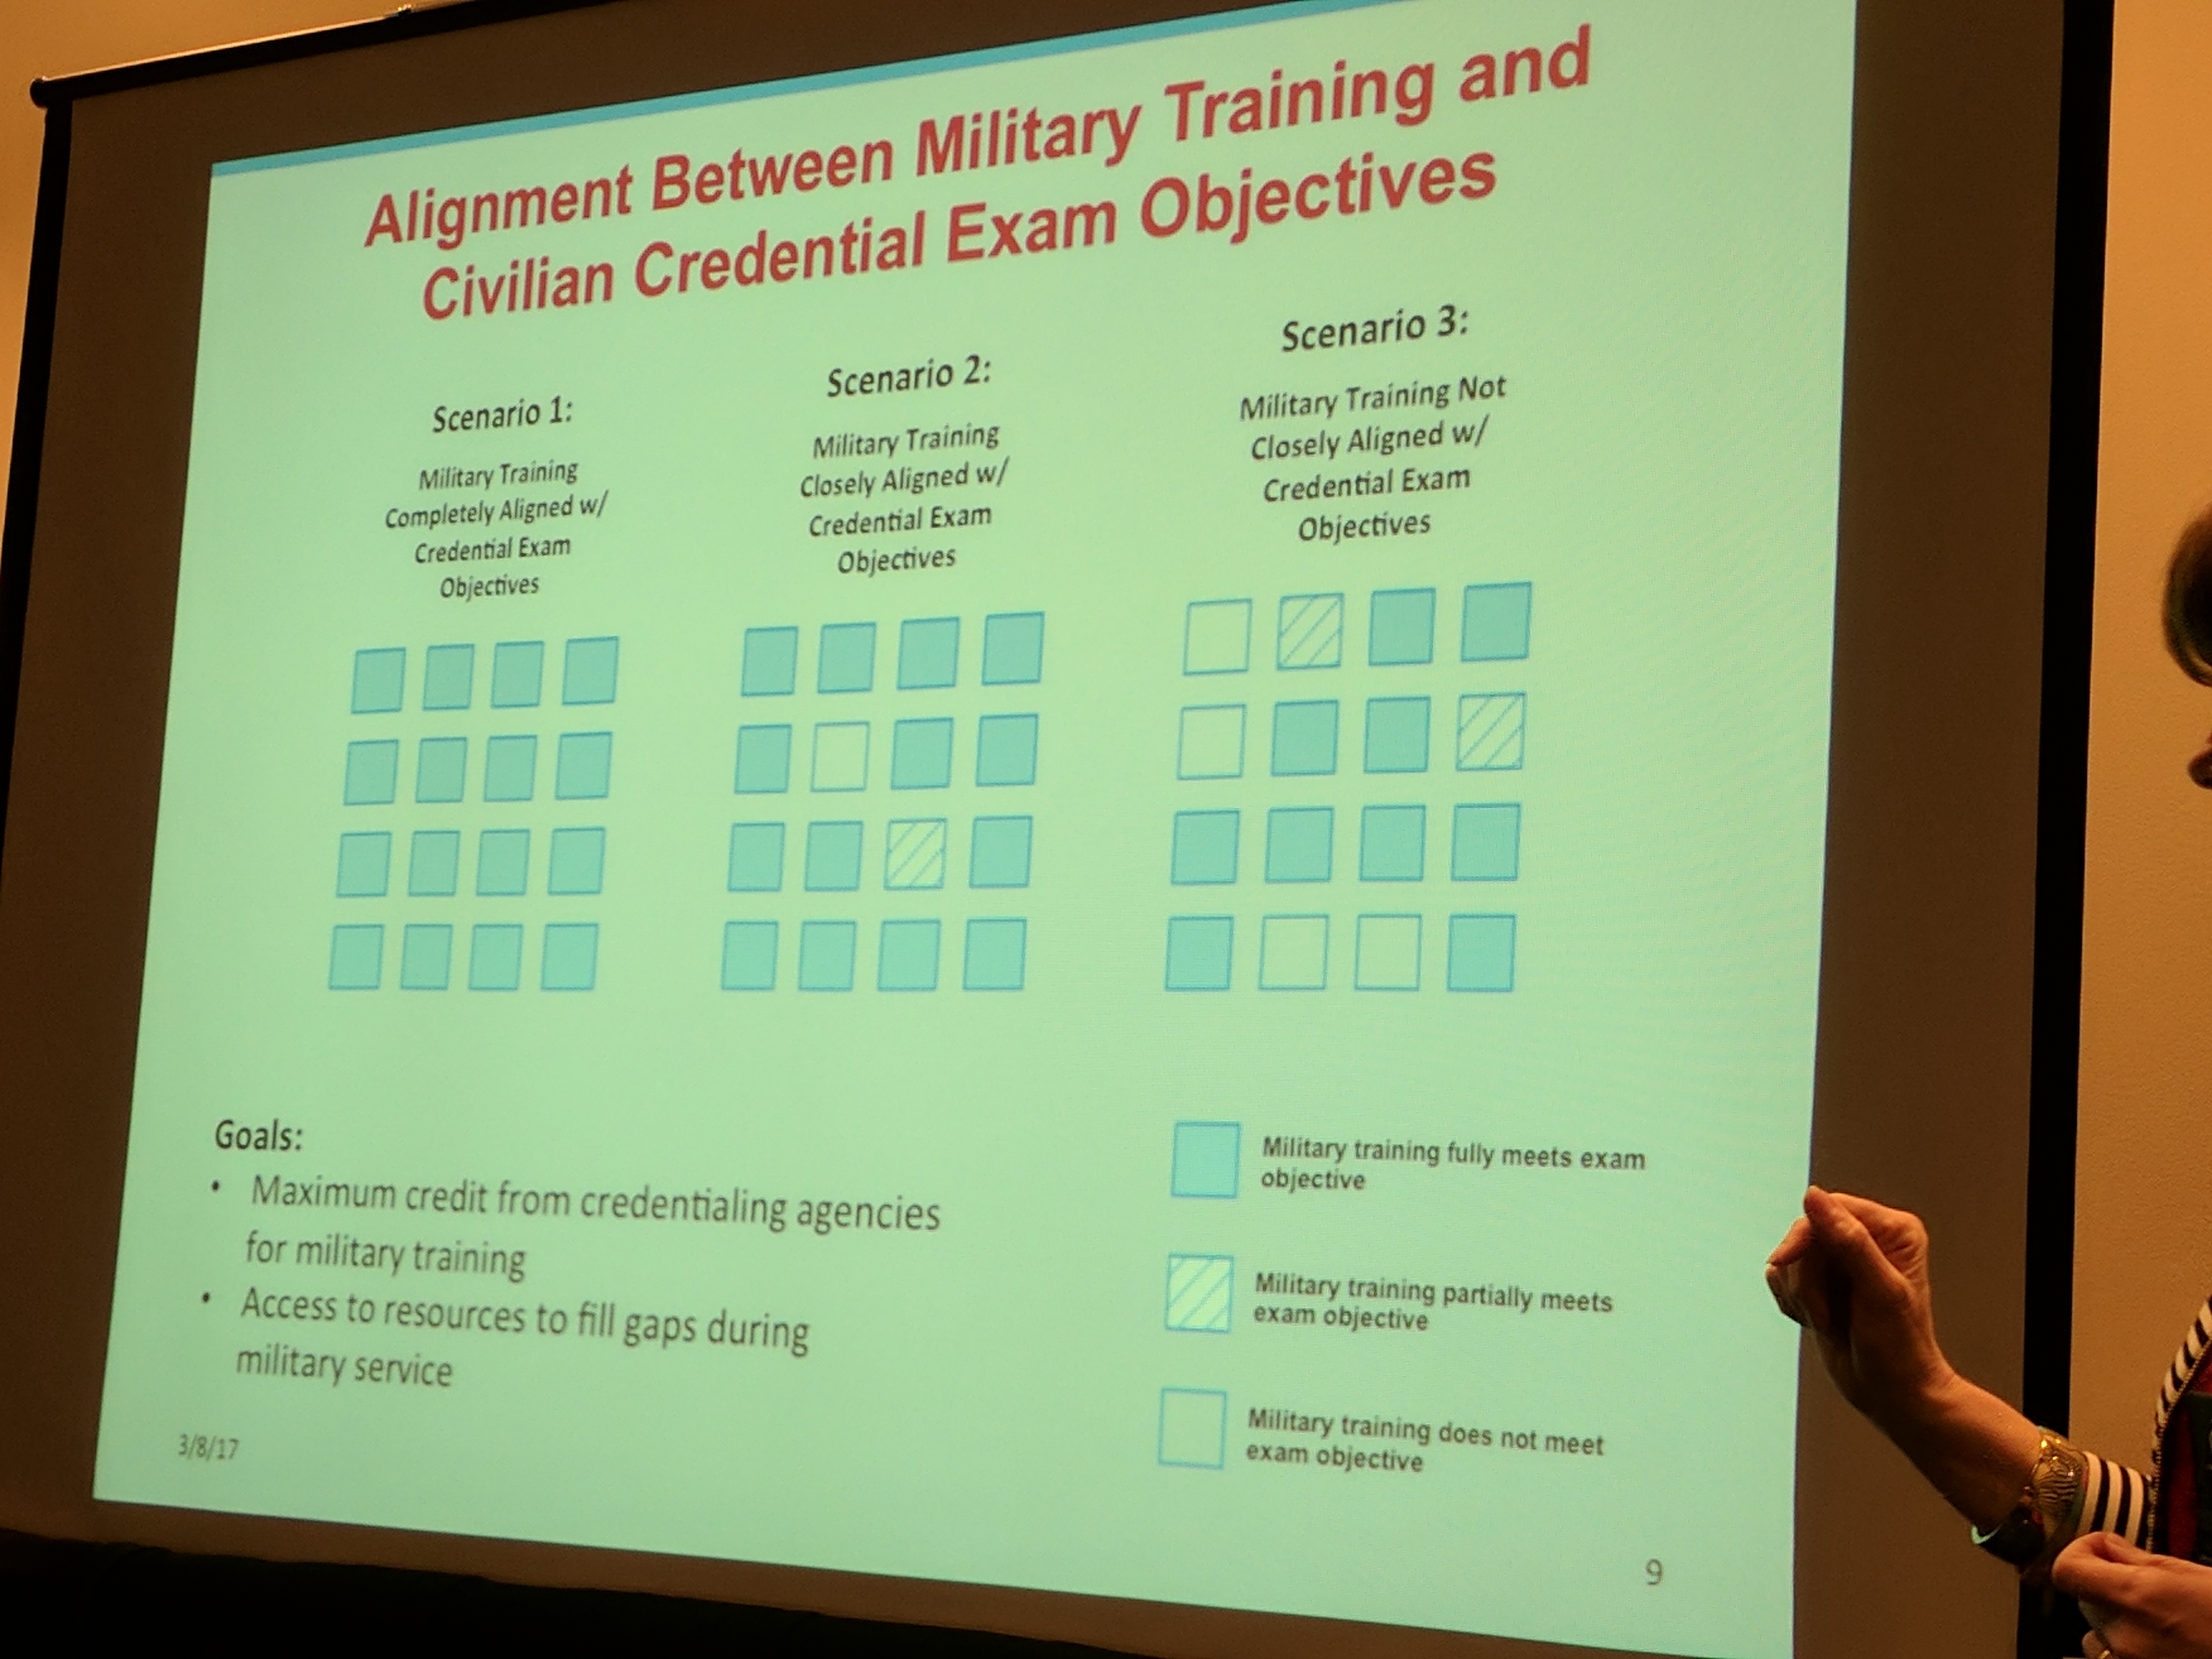 Slide showing sample alignments between military training and civilian credential exam objectives. Shown are three scenarios with perfect alignment, partial alignment, and not closely aligned.